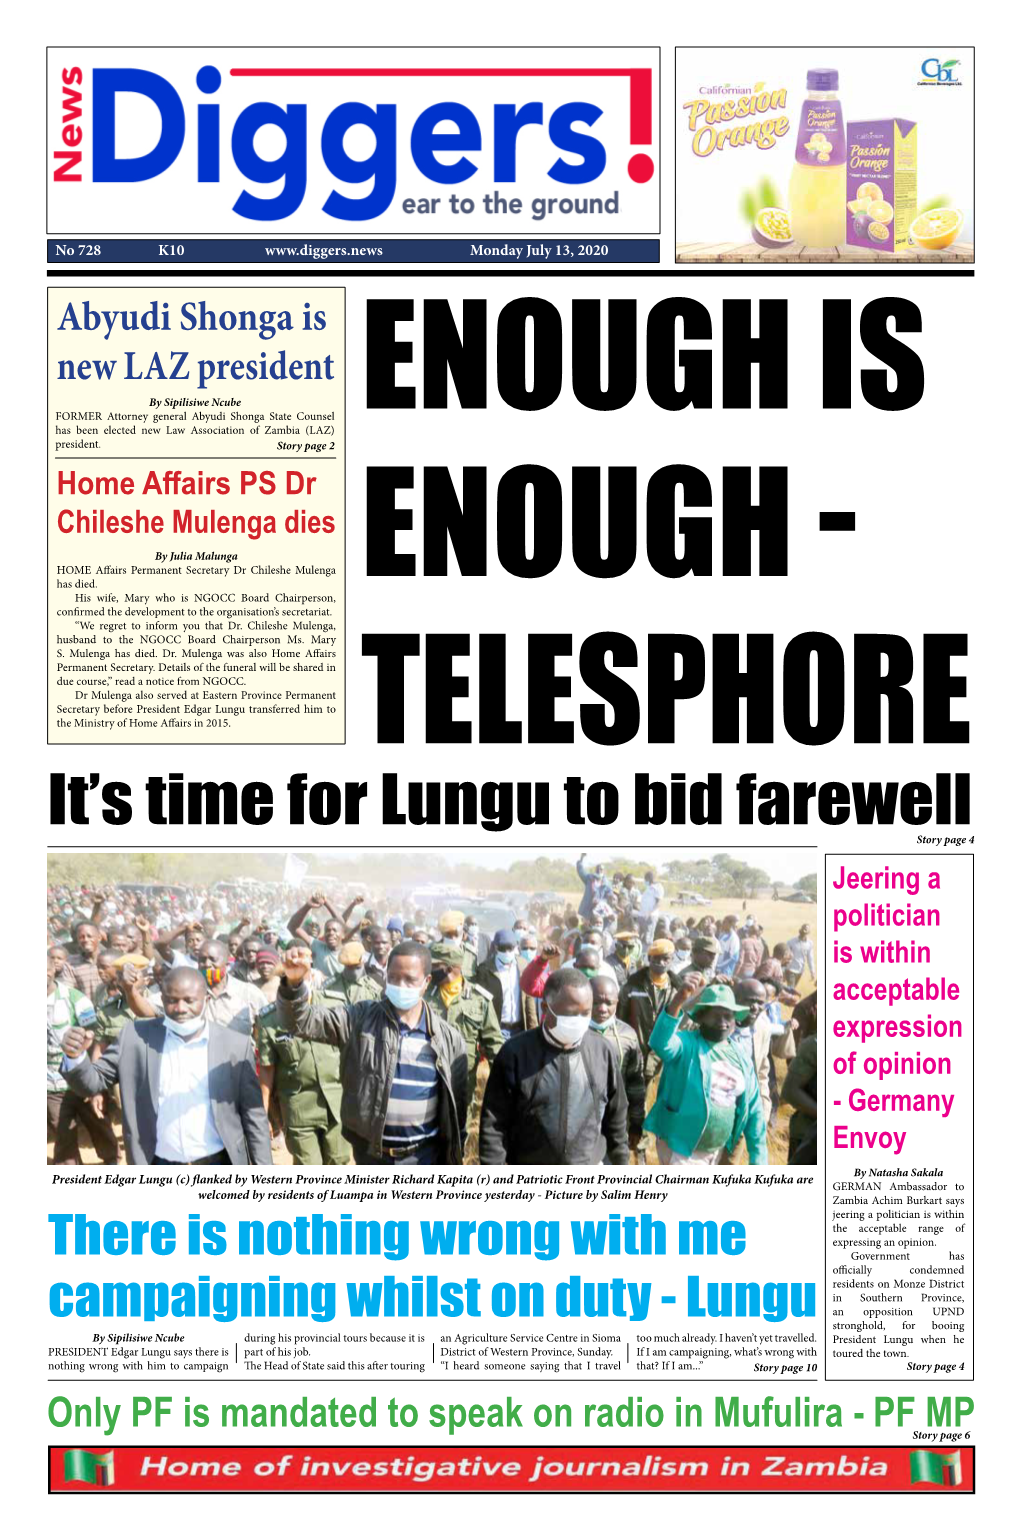 It's Time for Lungu to Bid Farewell